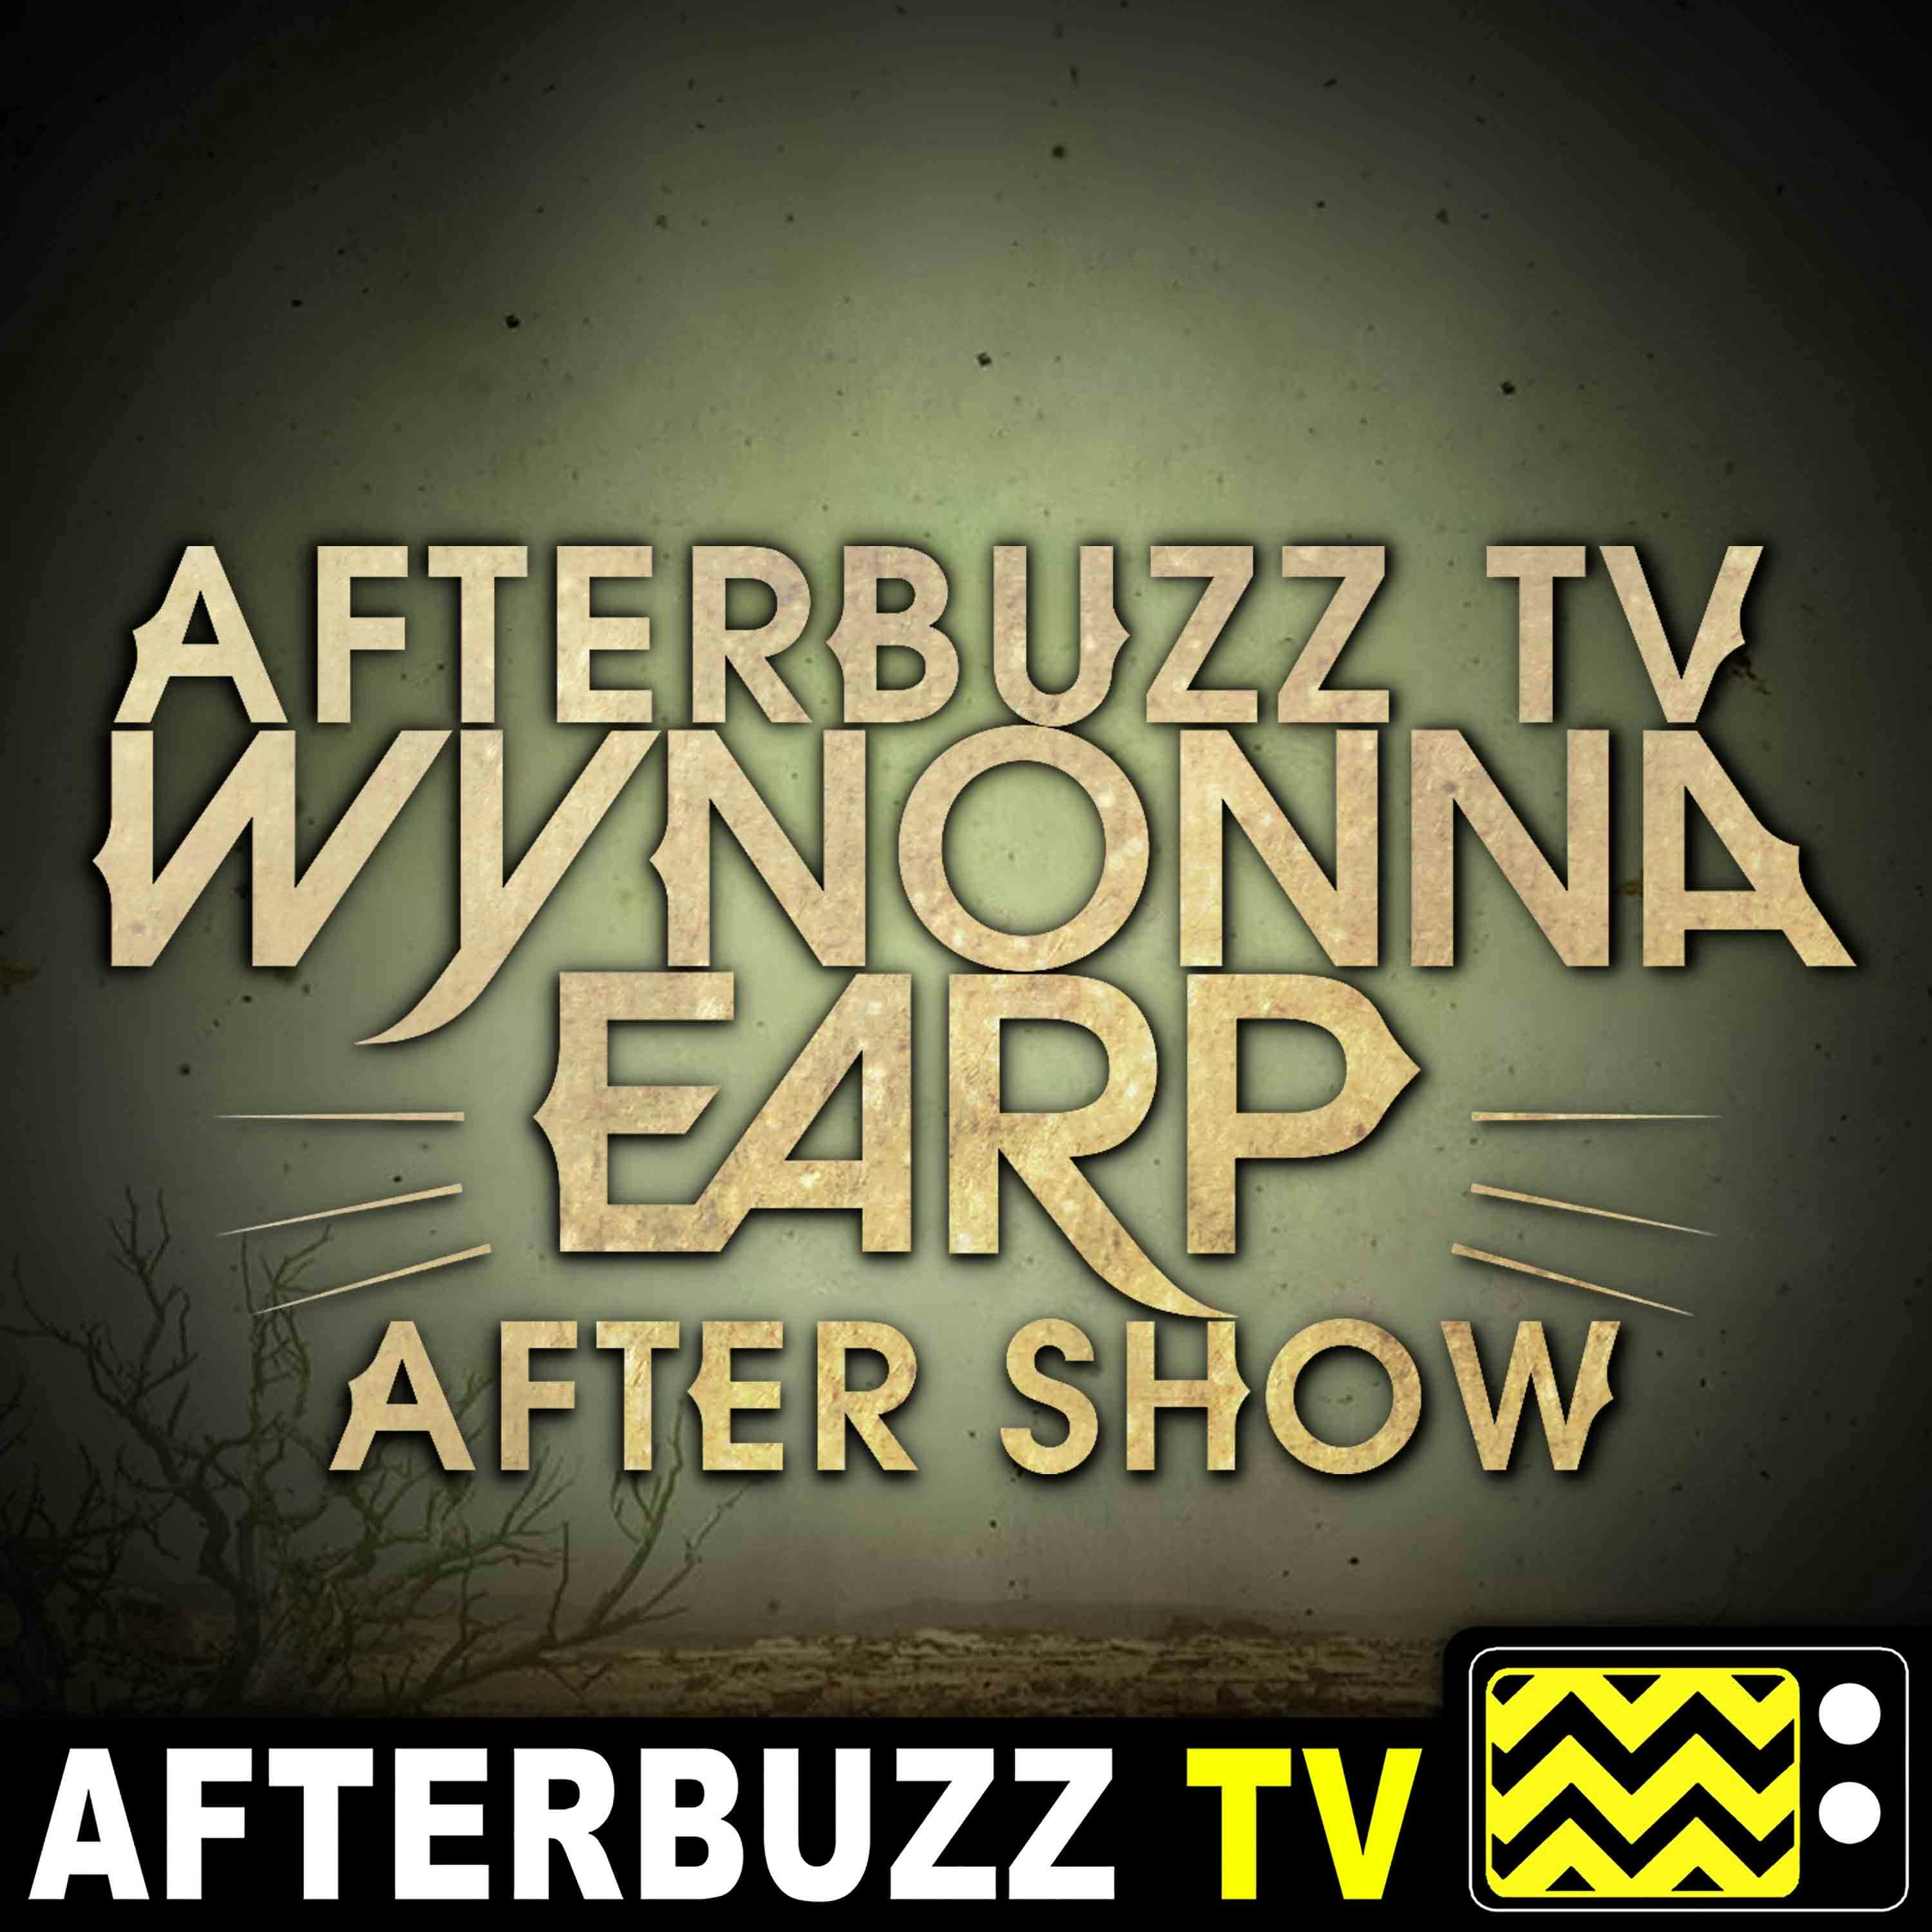 Wynonna Earp S:3 | Colder Weather E:3 | AfterBuzz TV AfterShow